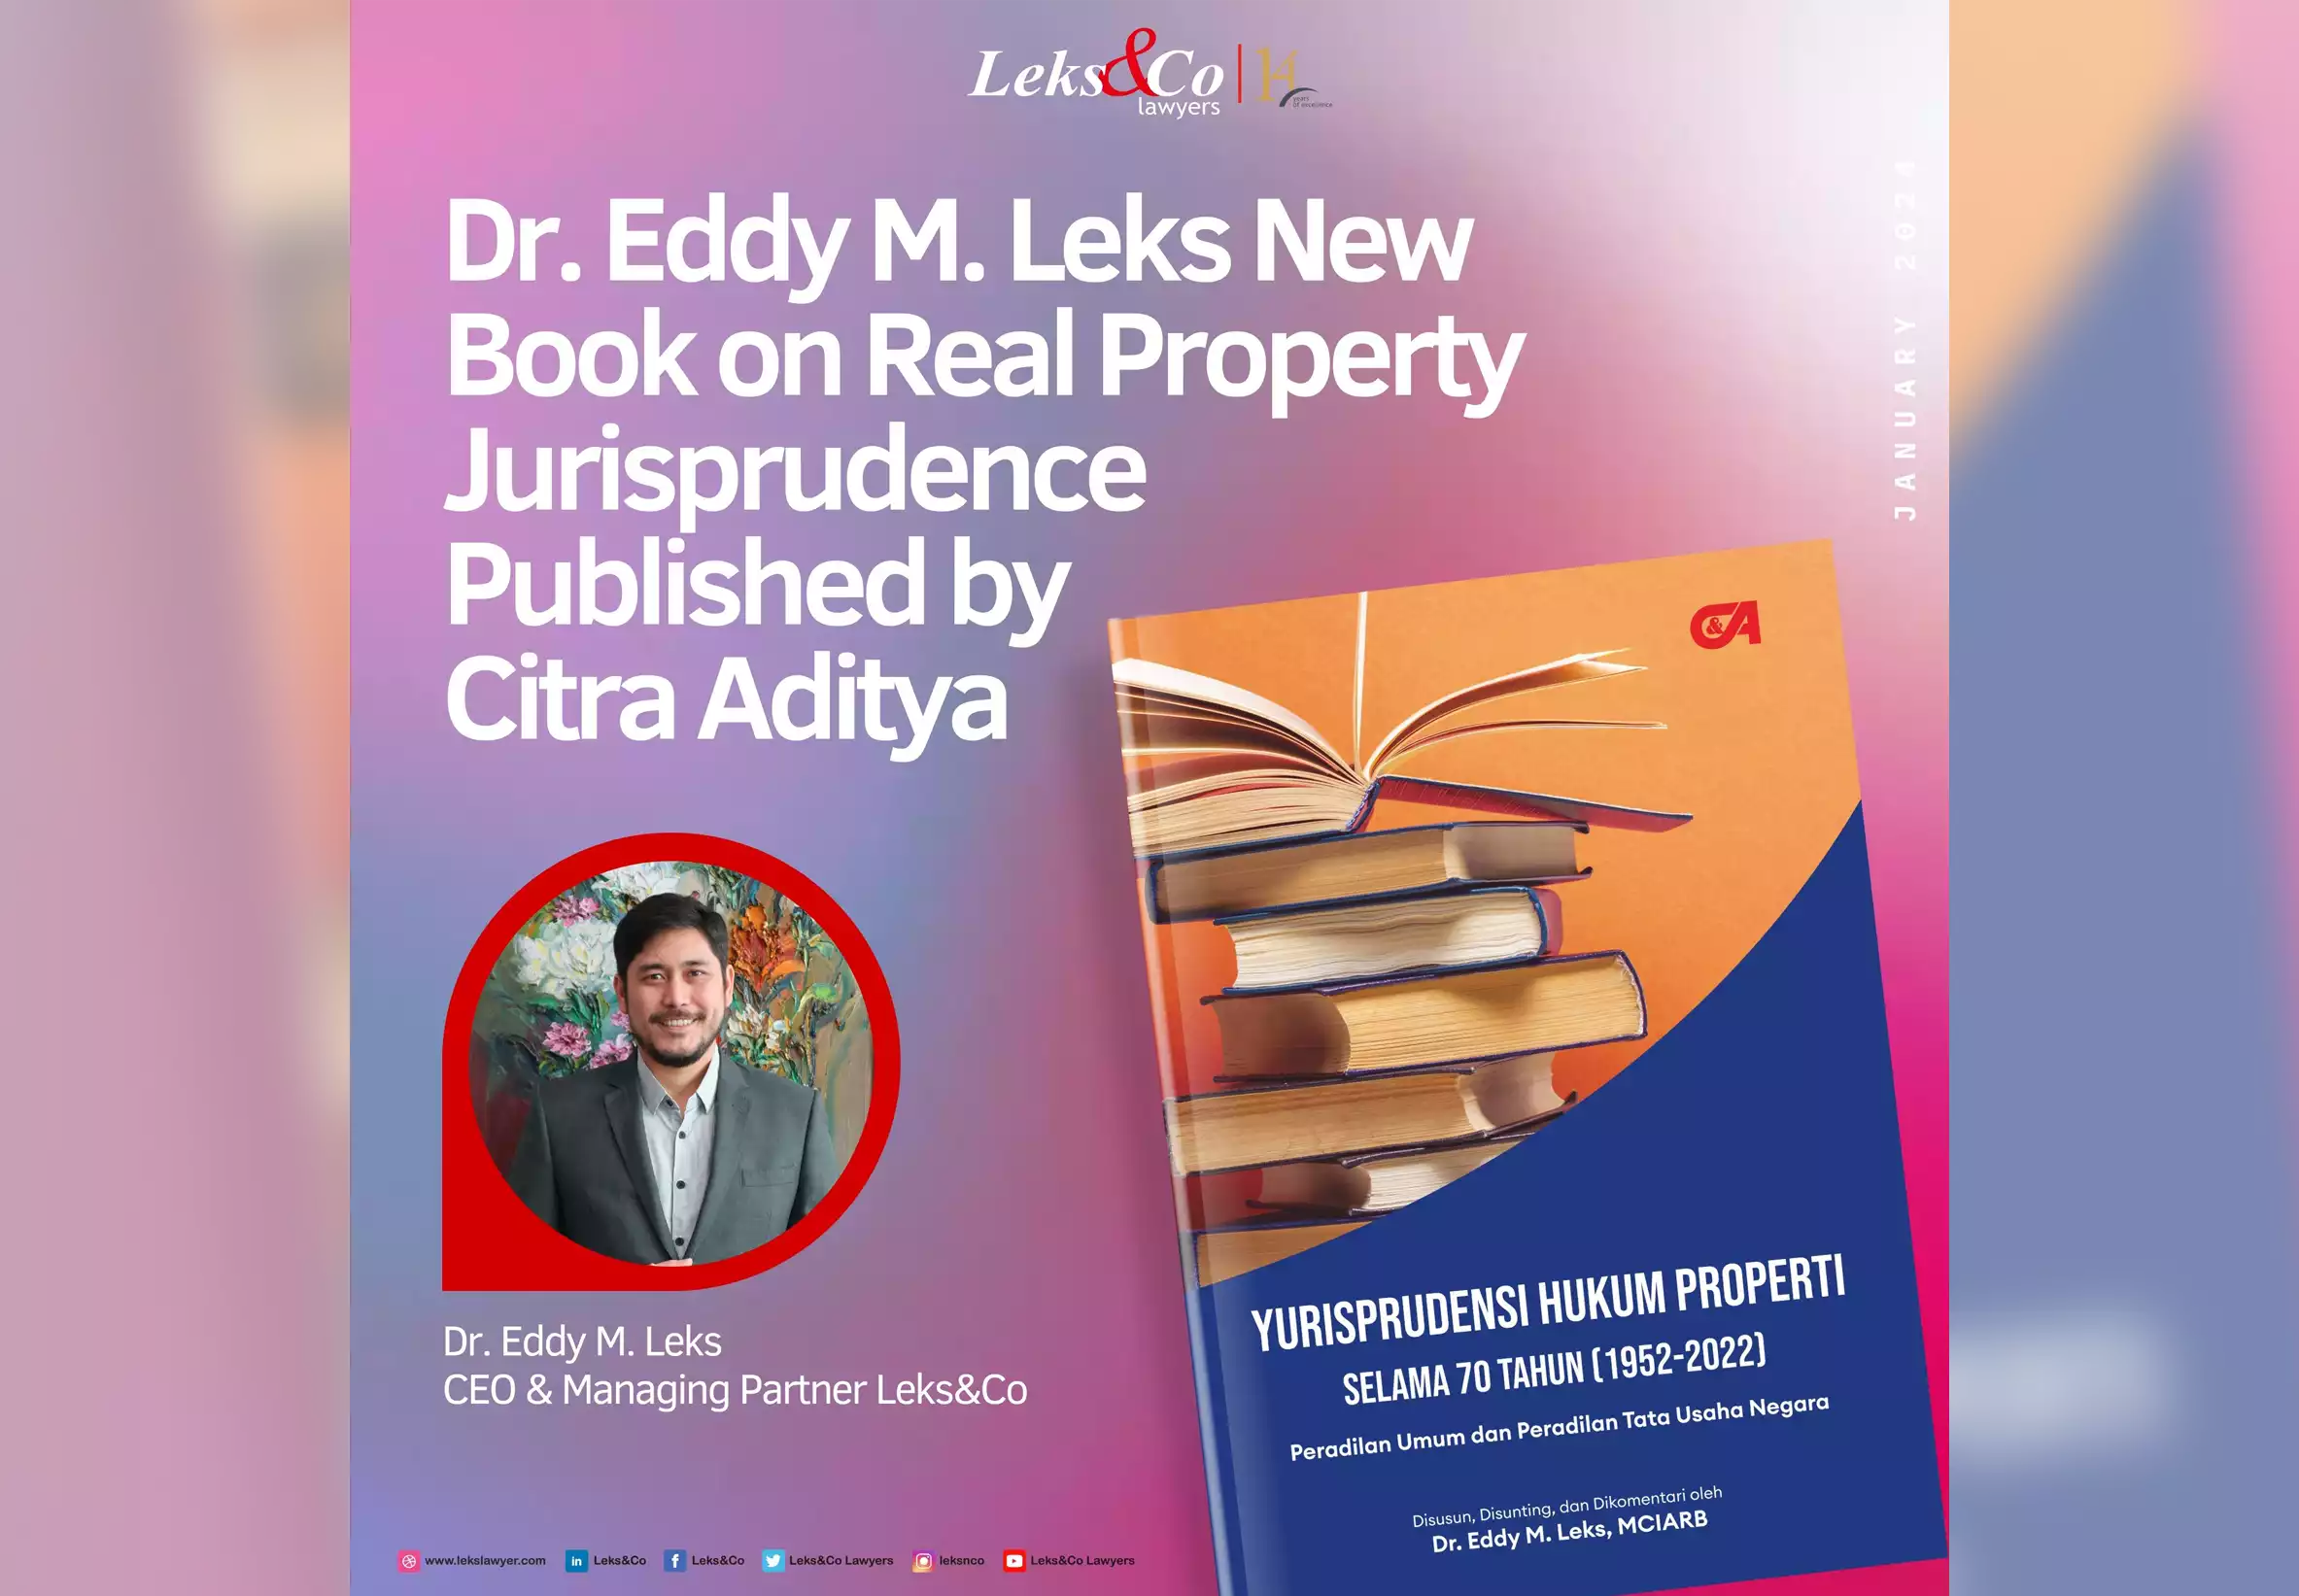 Dr. Eddy M. Leks New Book on Real Property Jurisprudence Published by Citra Aditya